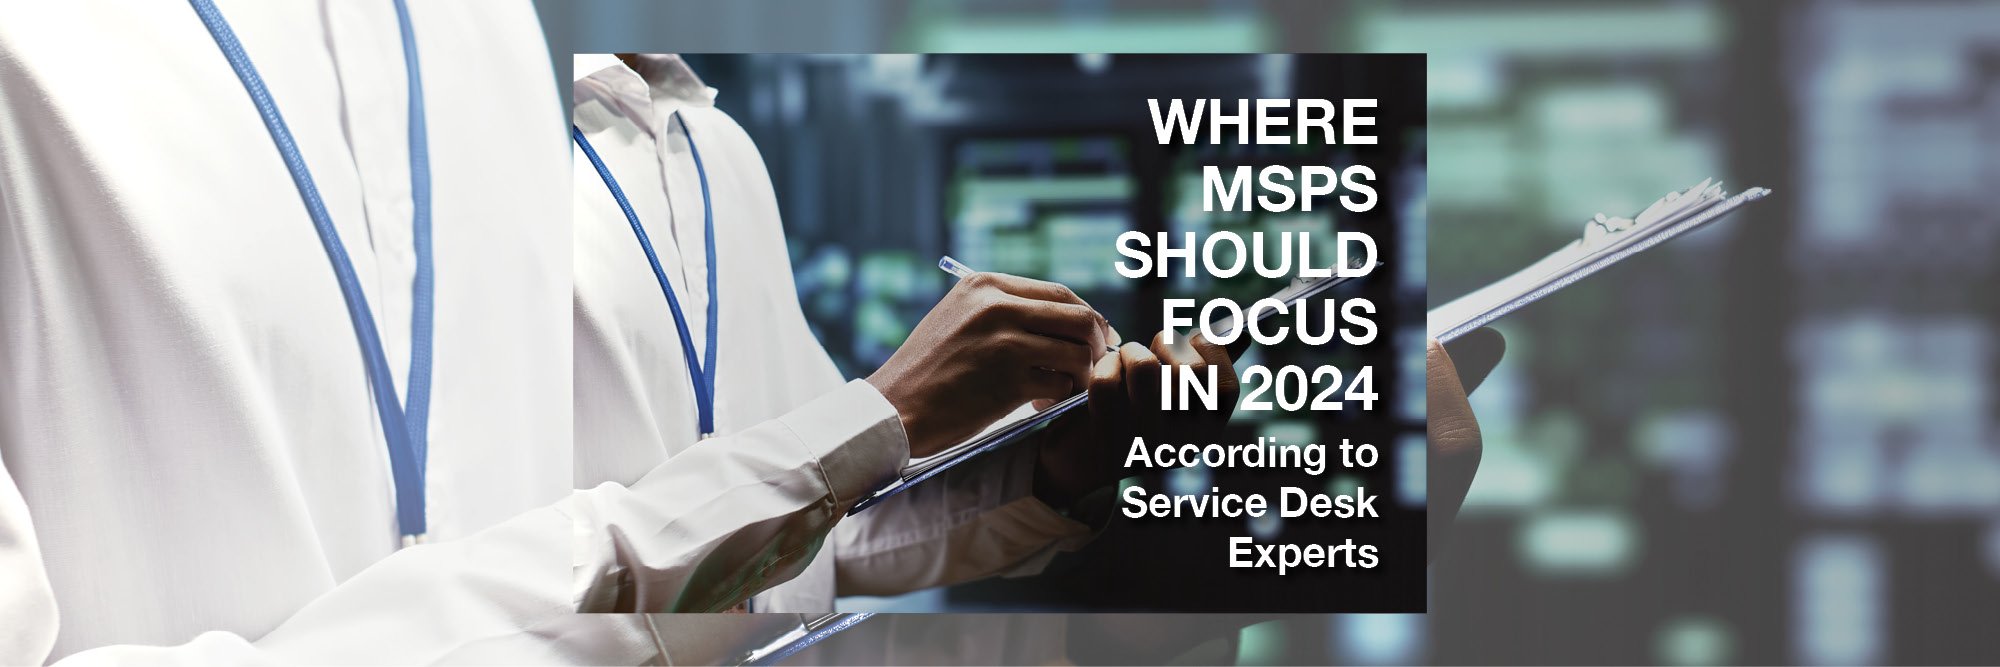 Where MSPs Should Focus in 2024, According to Service Desk Experts